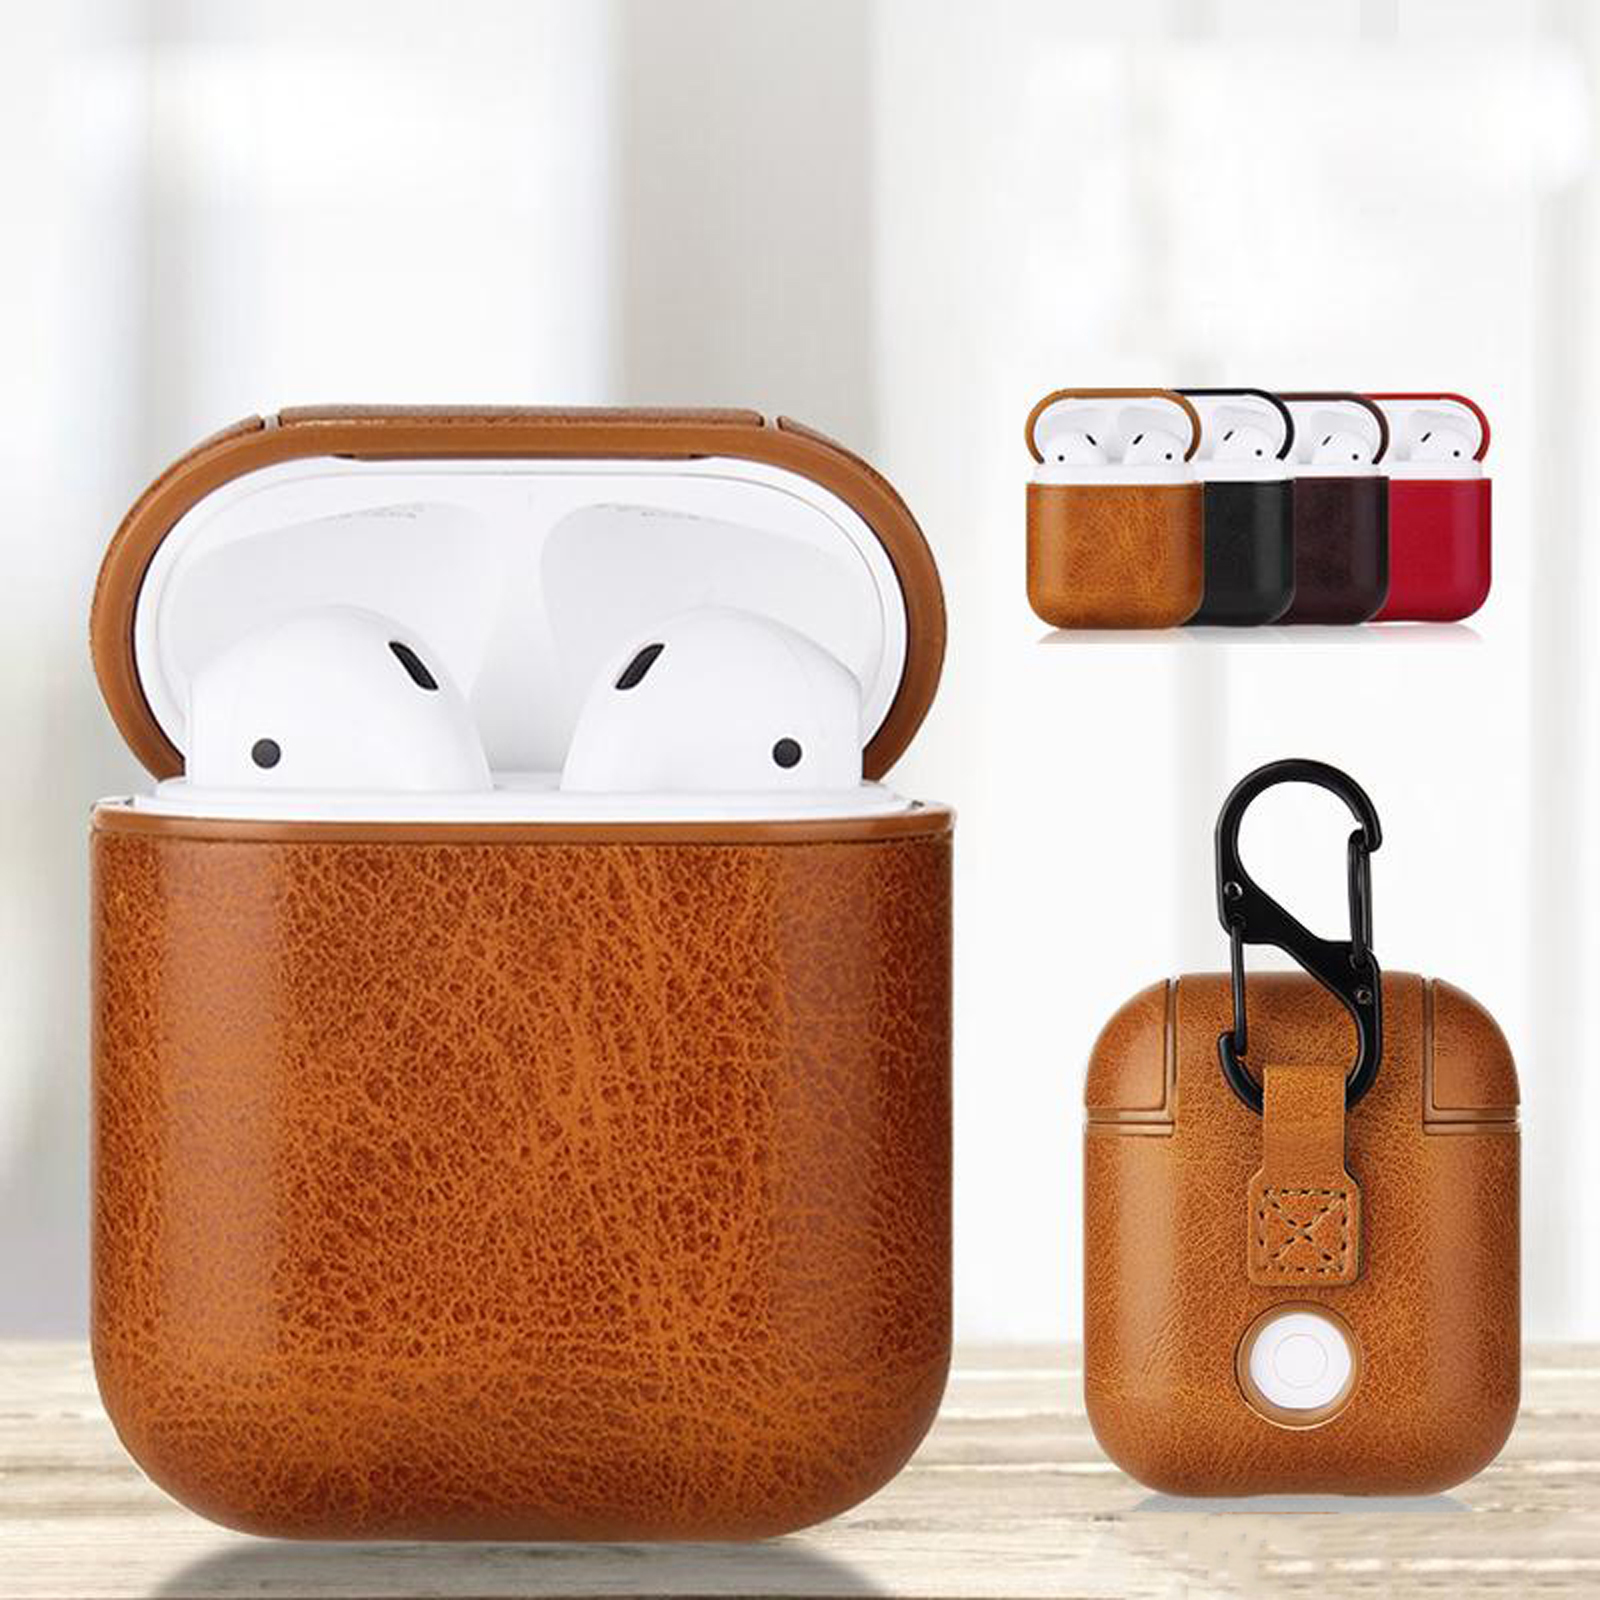 New Leather Soft Skin Case For Apple Airpods 1 2 1st 2nd Gen Earphones PU Cover | eBay